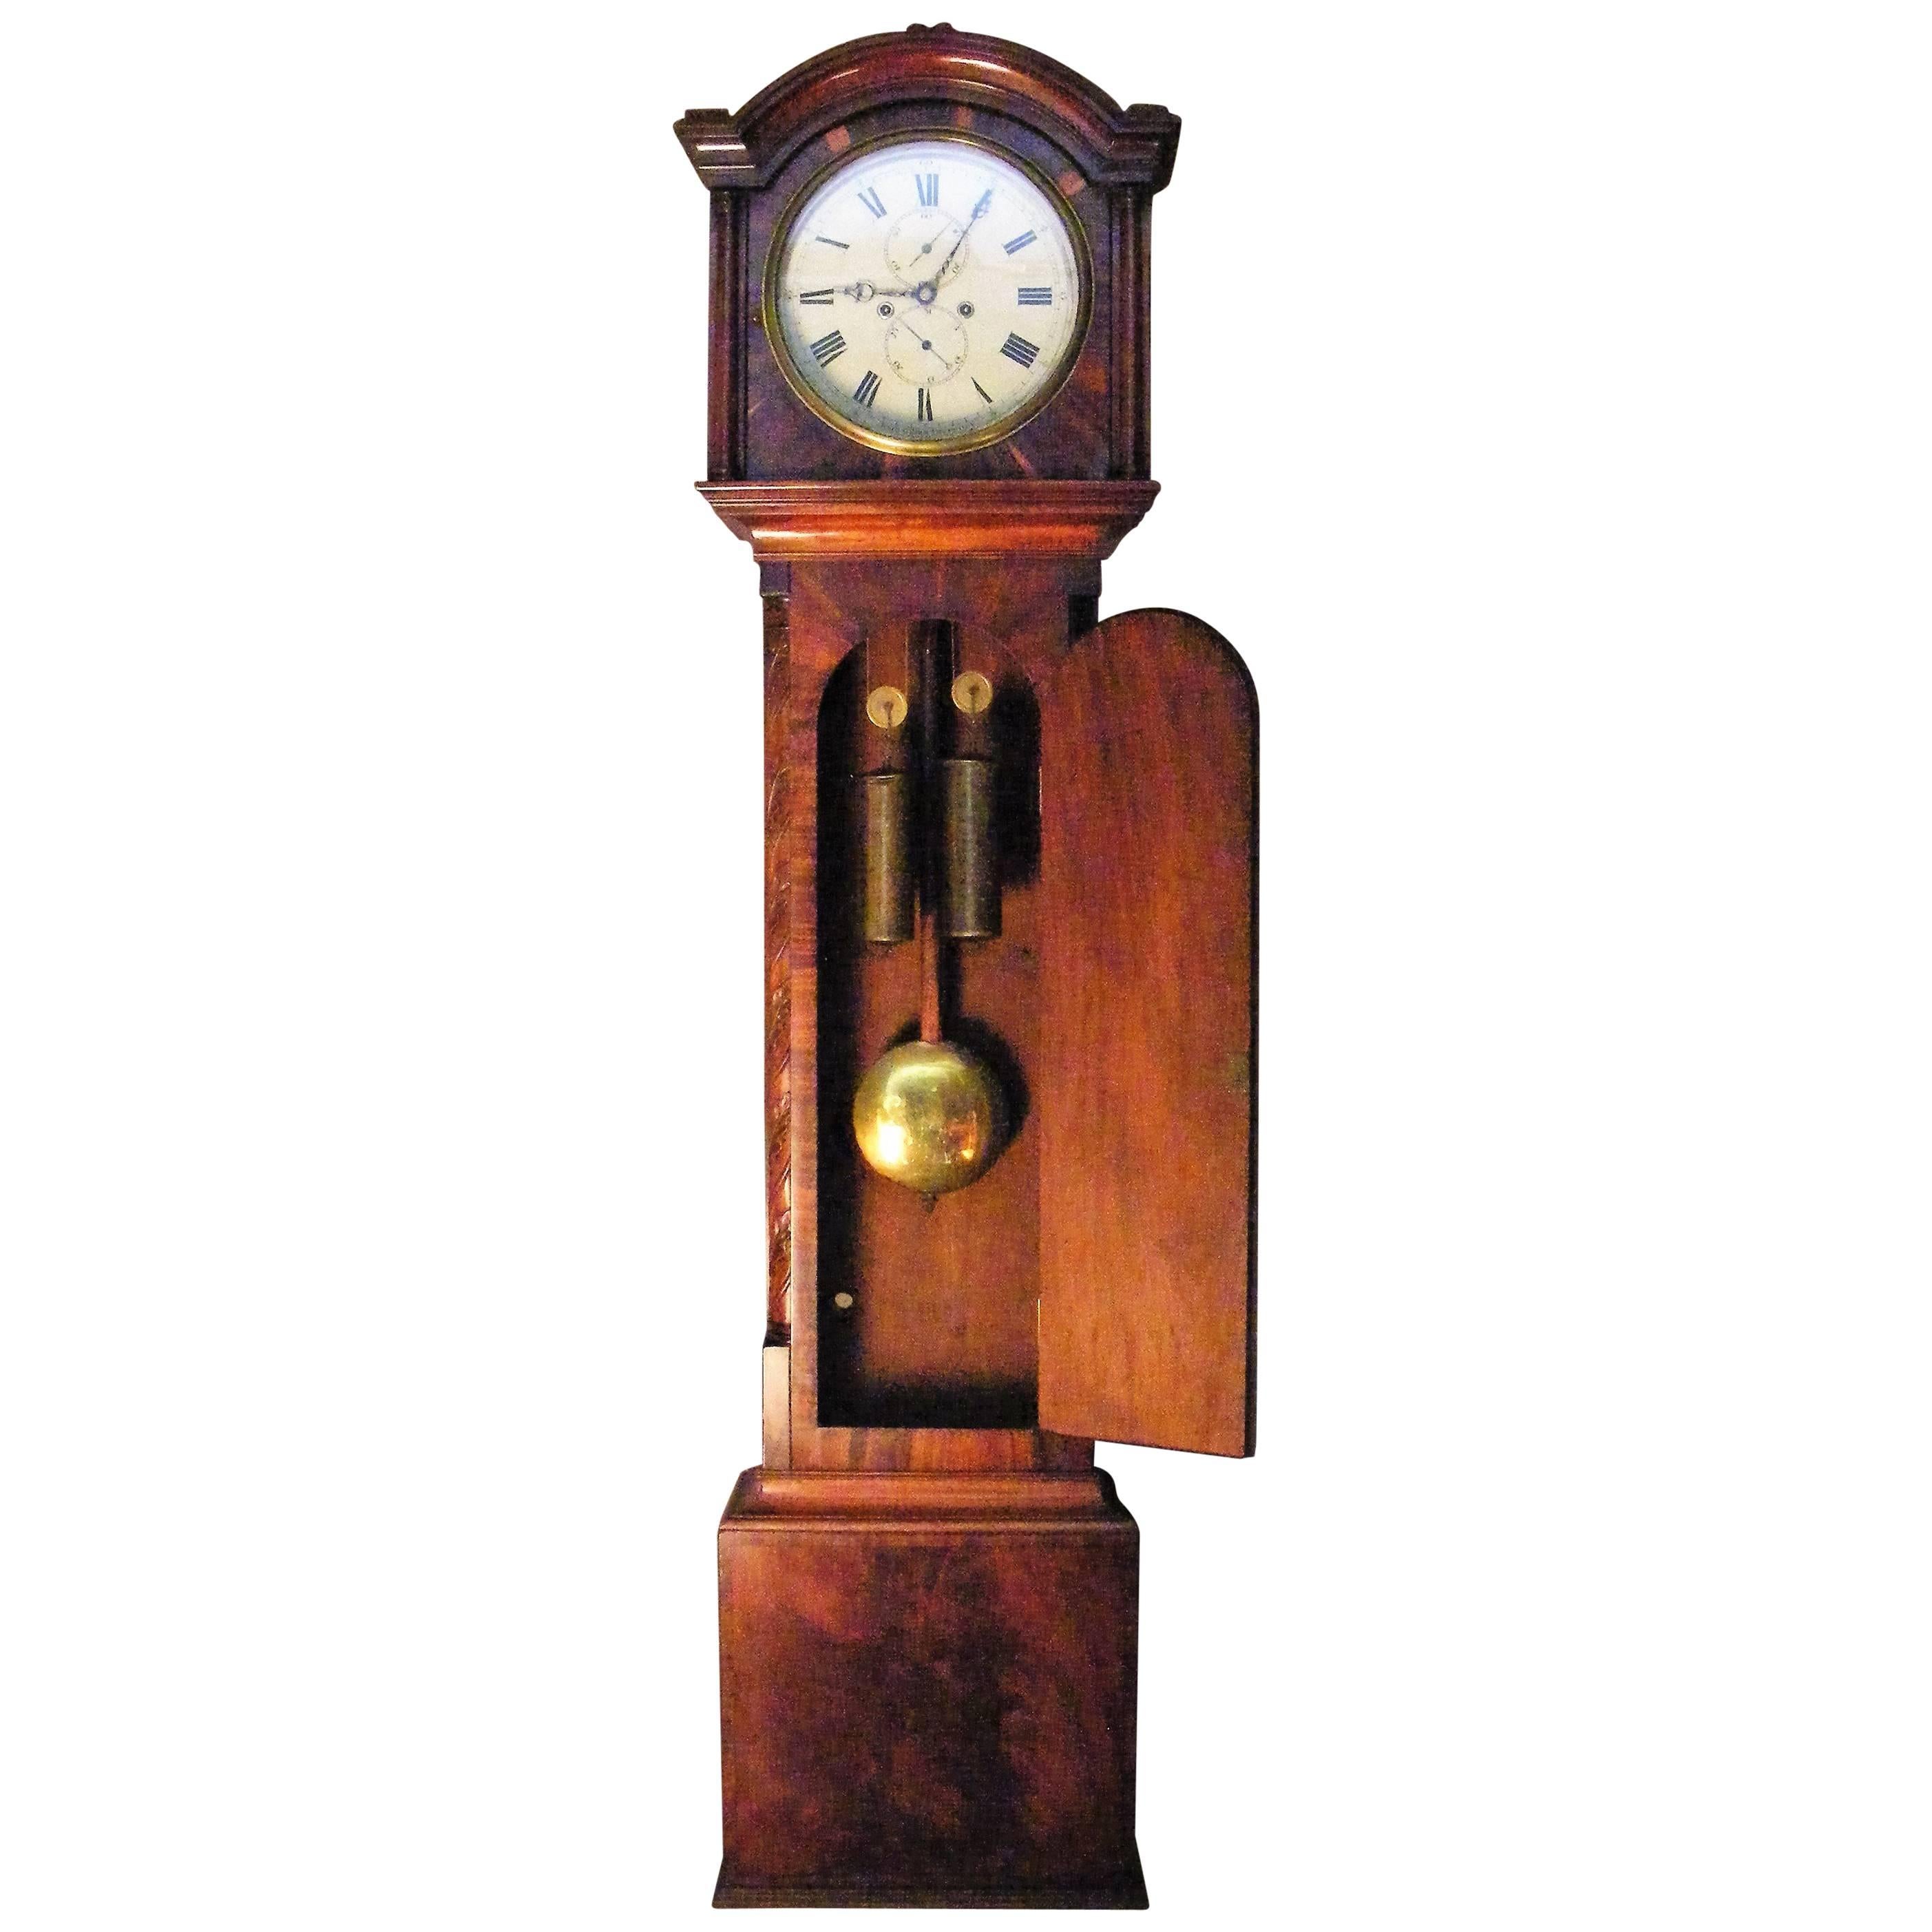 This exceptionally Fine Grandfather Clock by John Gillan of Keith Hall Inverurie.
Dated circa 1837 has the finest mechanism heavy quality brass works even with blued screws double train movement striking the hour and with second hand and date